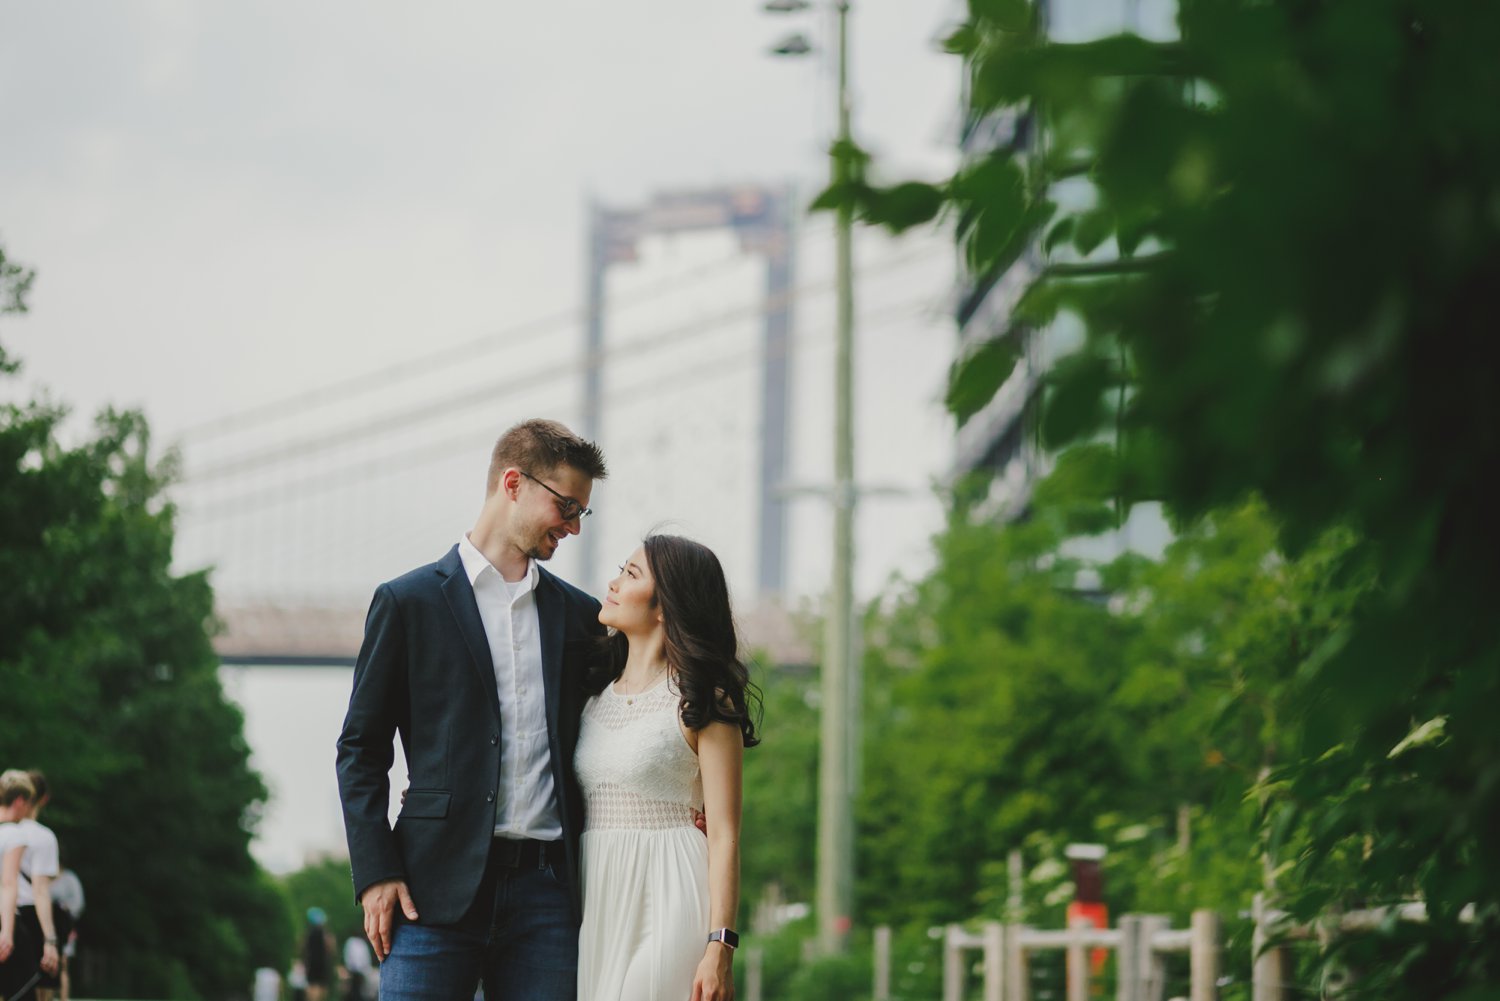 12NYC-NJ-ENGAGEMENT-PHOTOGRAPHY-BY-INTOTHESTORY-MOO-JAE.JPG